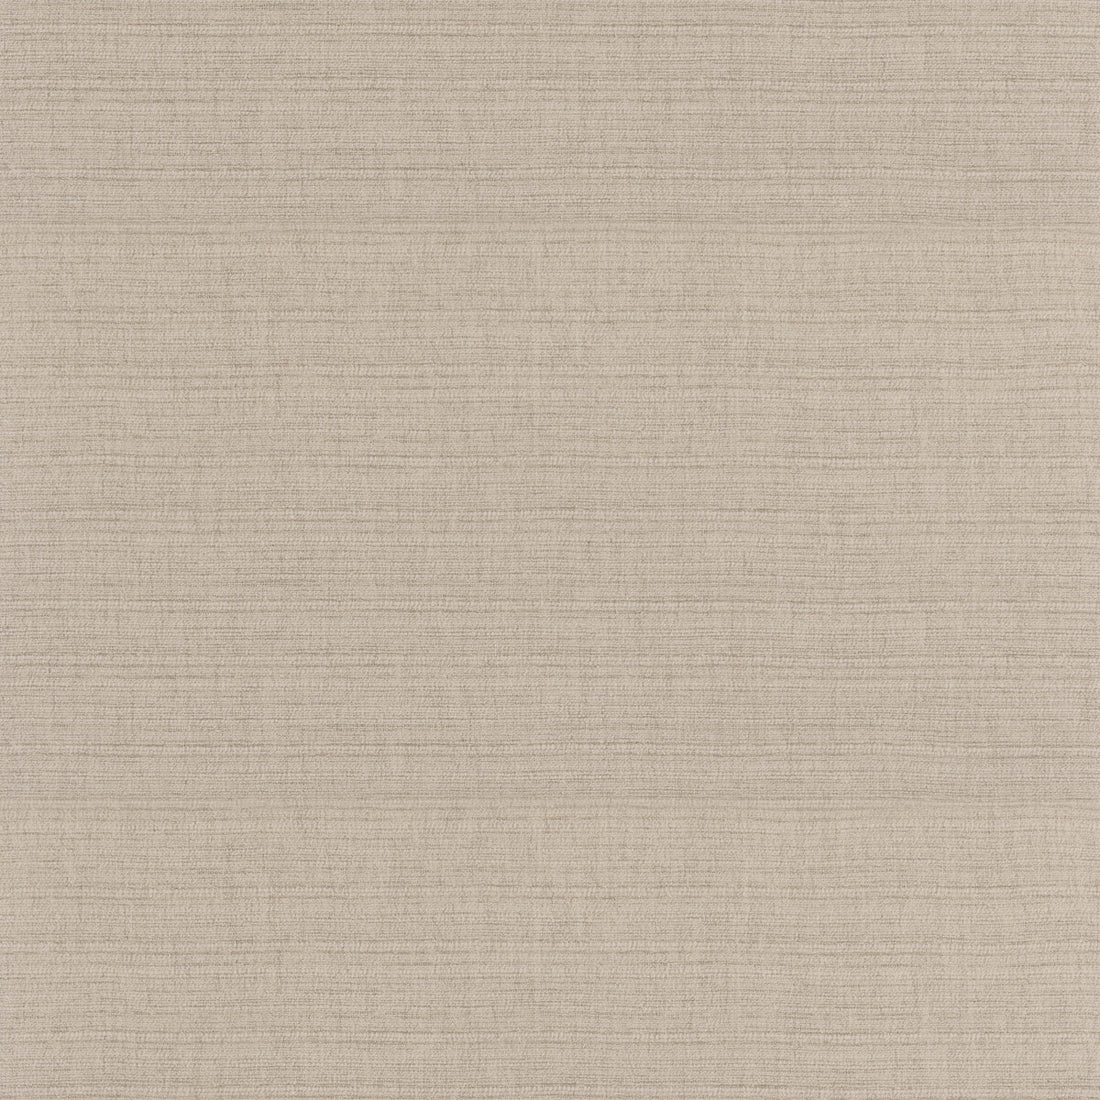 Archipelago fabric in parchment color - pattern ED85411.225.0 - by Threads in the Quintessential Textures collection